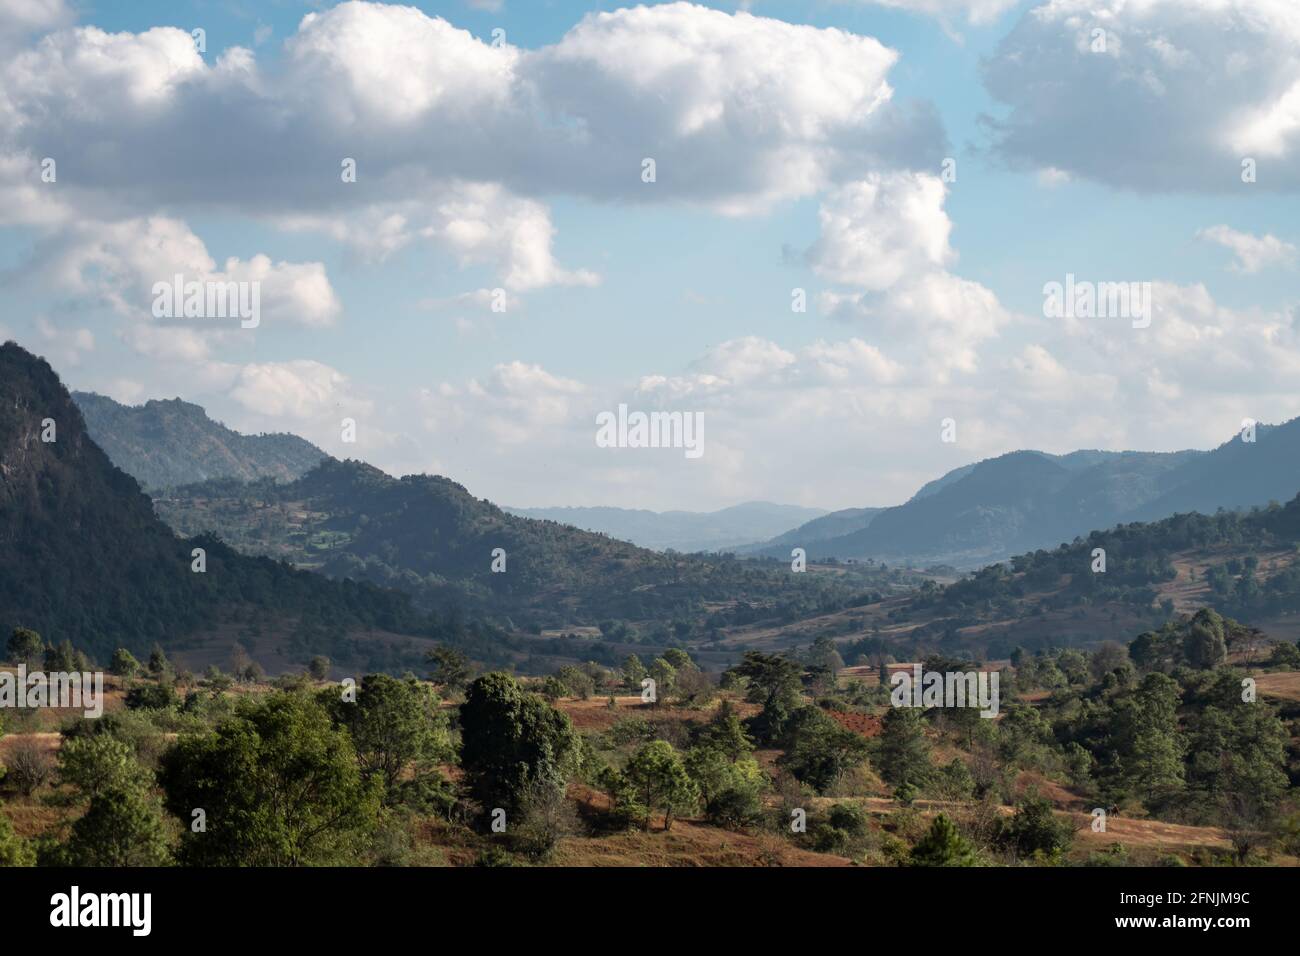 Beautiful valley landscape between hills and mountains between Kalaw and Inle Lake, Shan state, Myanmar Stock Photo